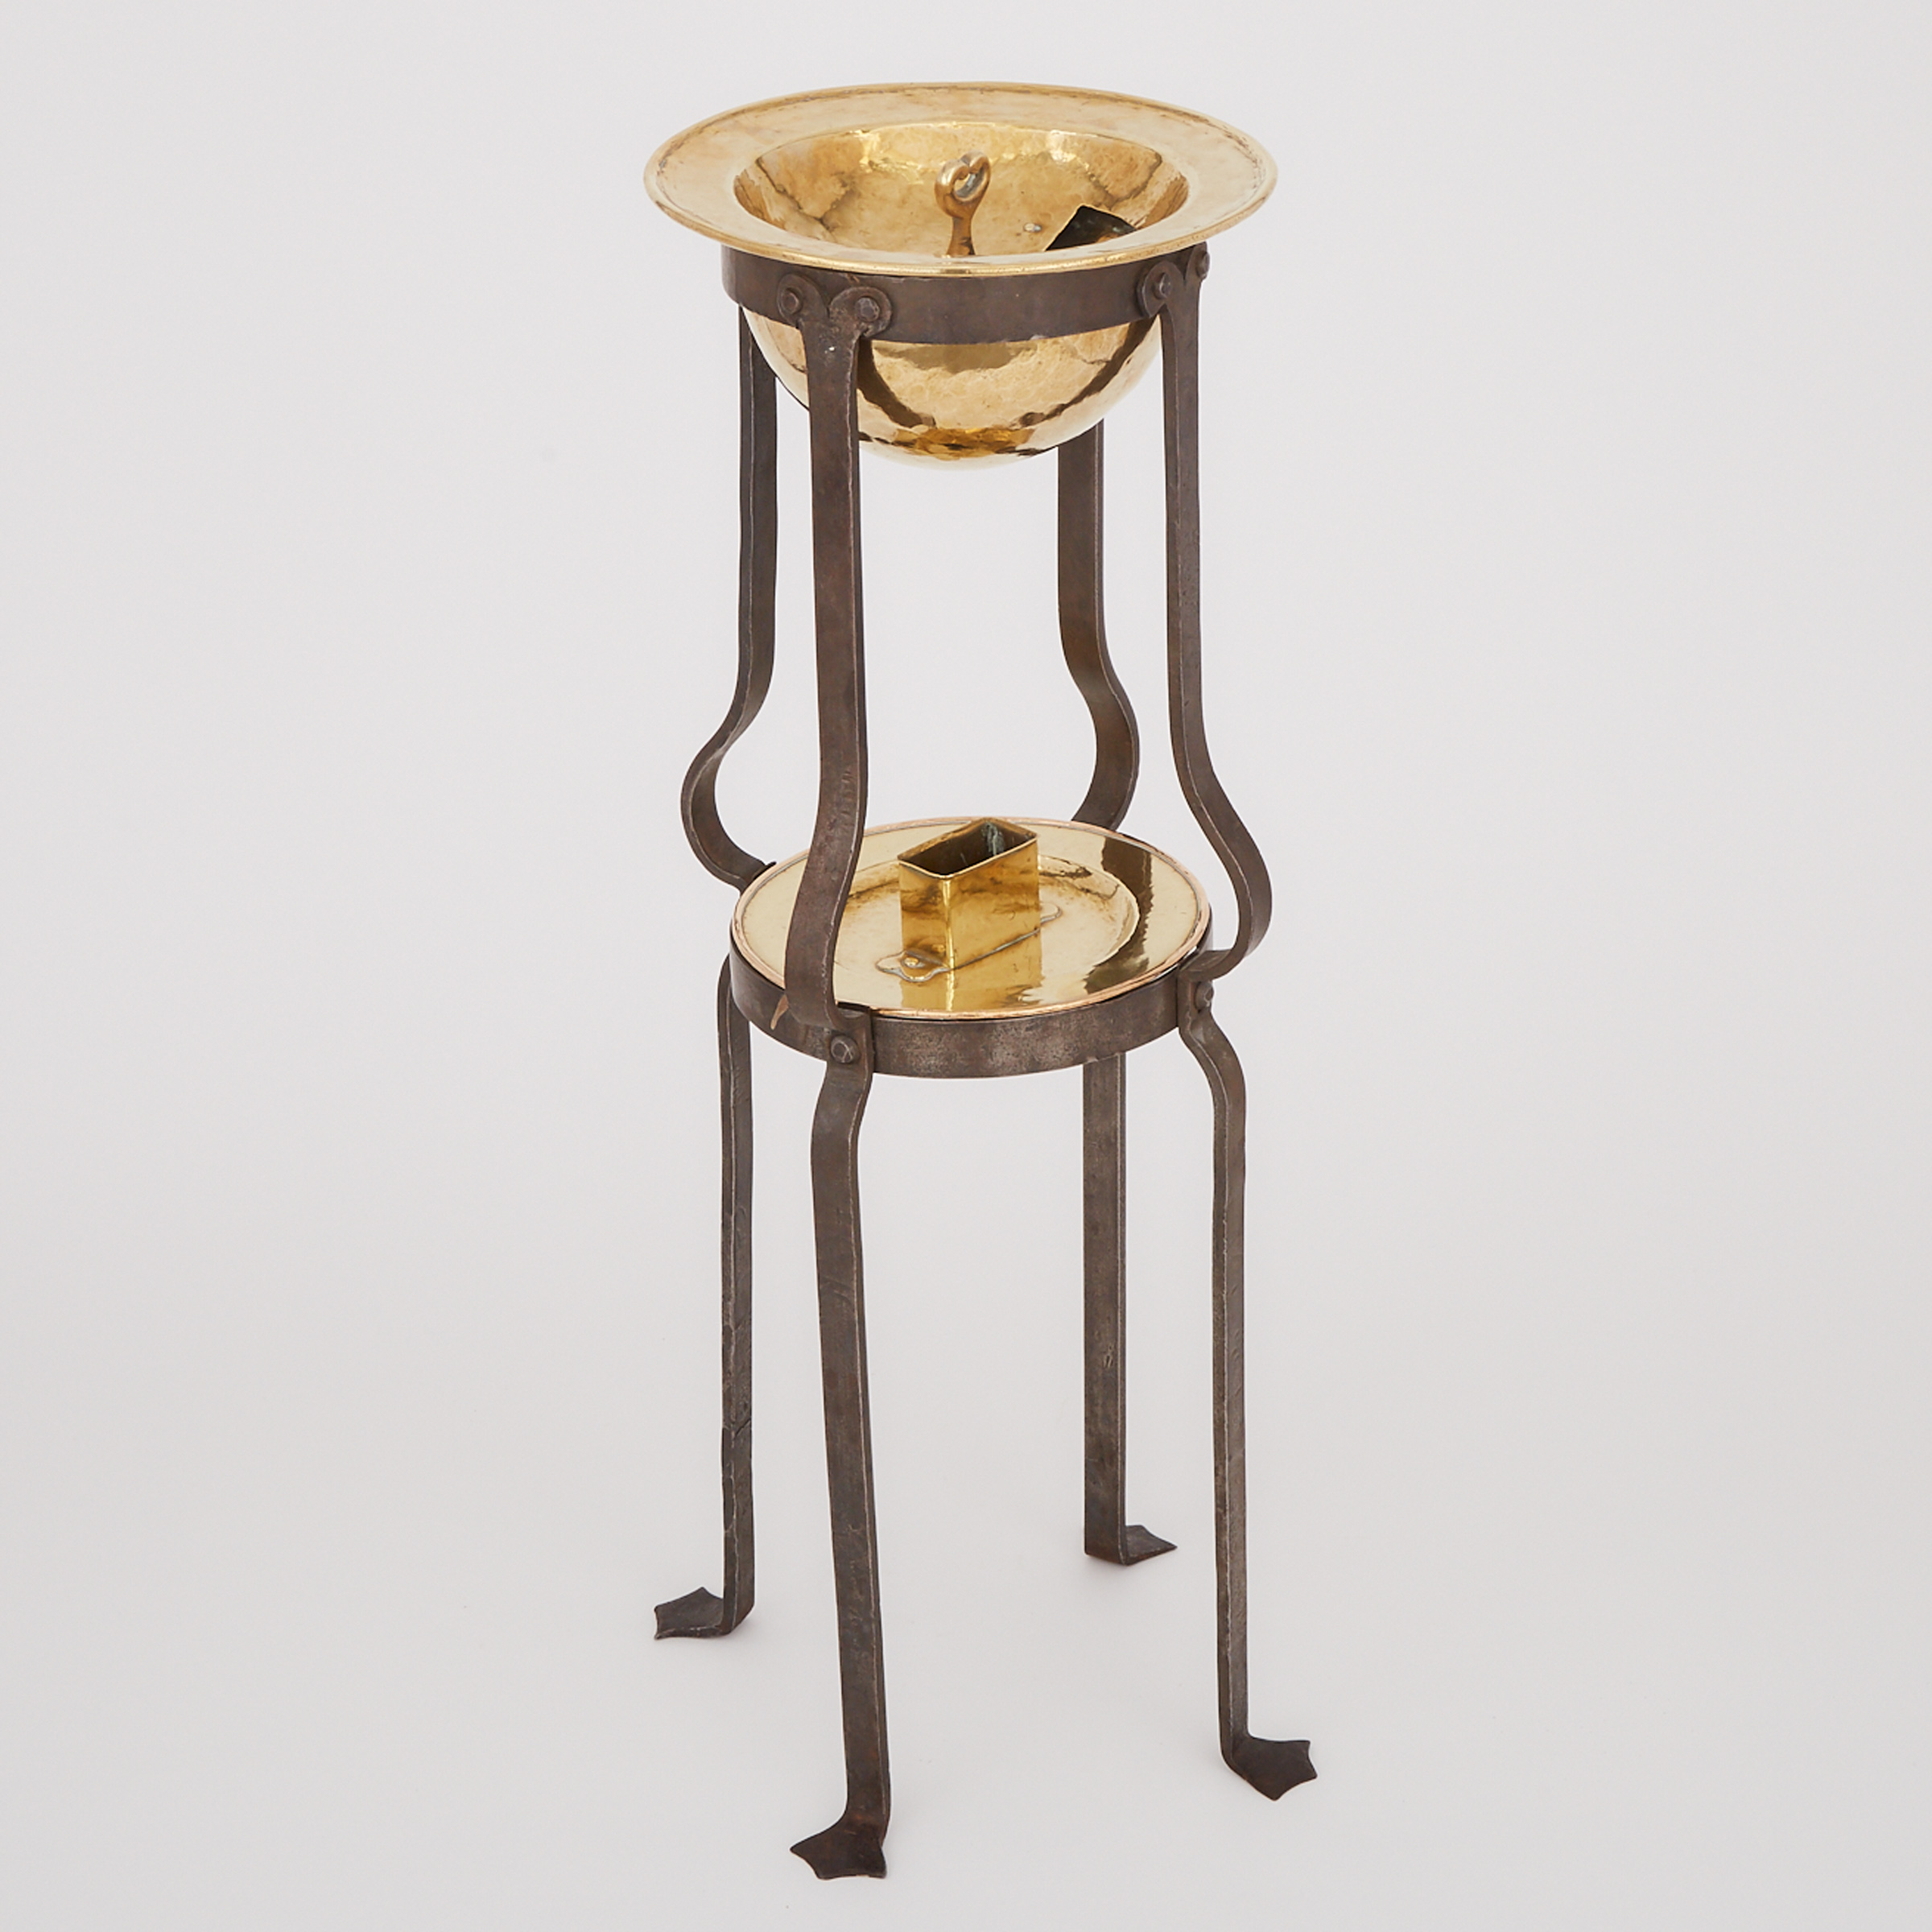 Paul Beau (Canadian, 1871-1941)  Wrought Iron and Brass Smoking Stand, Montreal, early 20th century